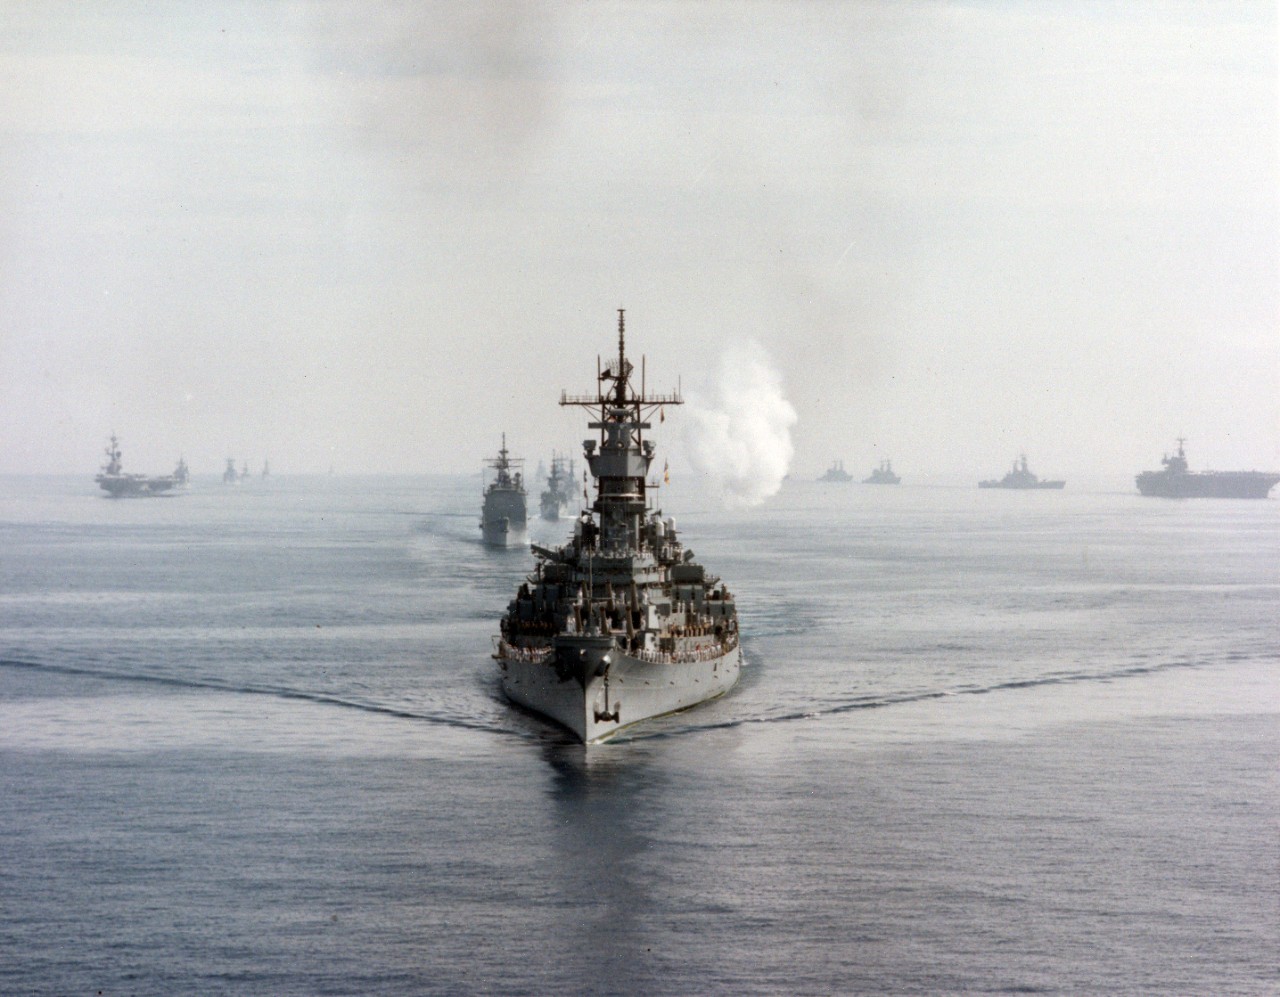 The battleship USS Iowa (BB-61) leads its battle group into Augusta Bay, Sicily. The aircraft carrier USS Coral Sea (CV-43) and its battle group are at left; the aircraft carrier USS Saratoga (CV-60) and its battle group are at right.